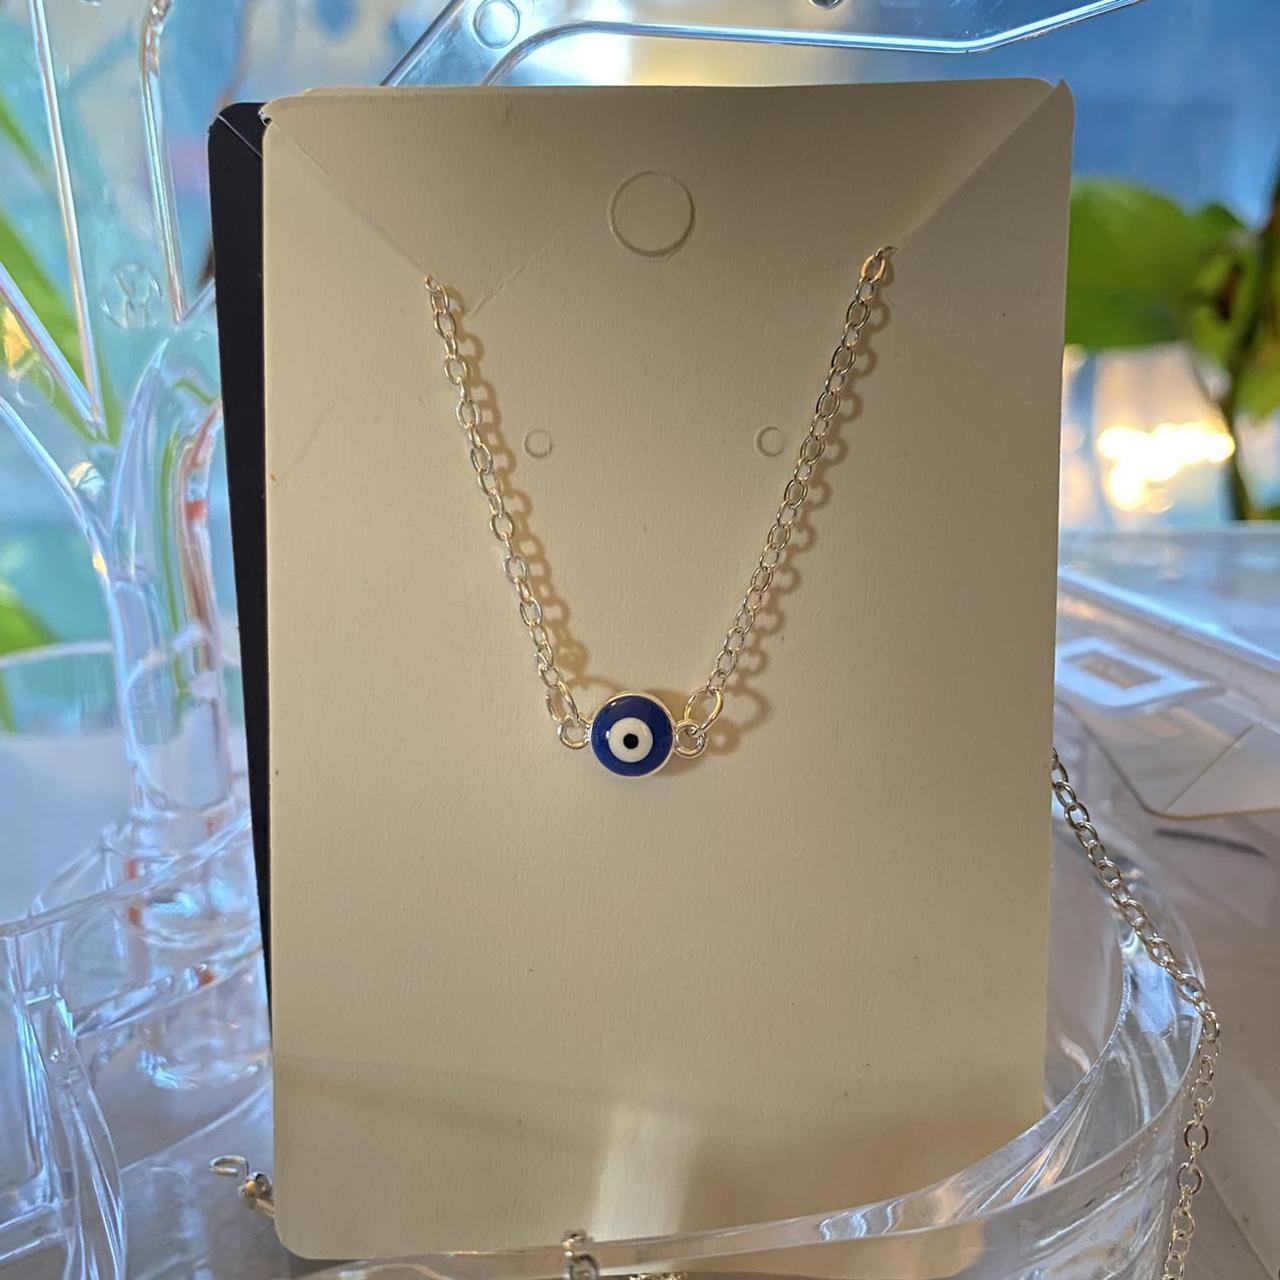 Product Image 2 - Silver evil eye necklace with